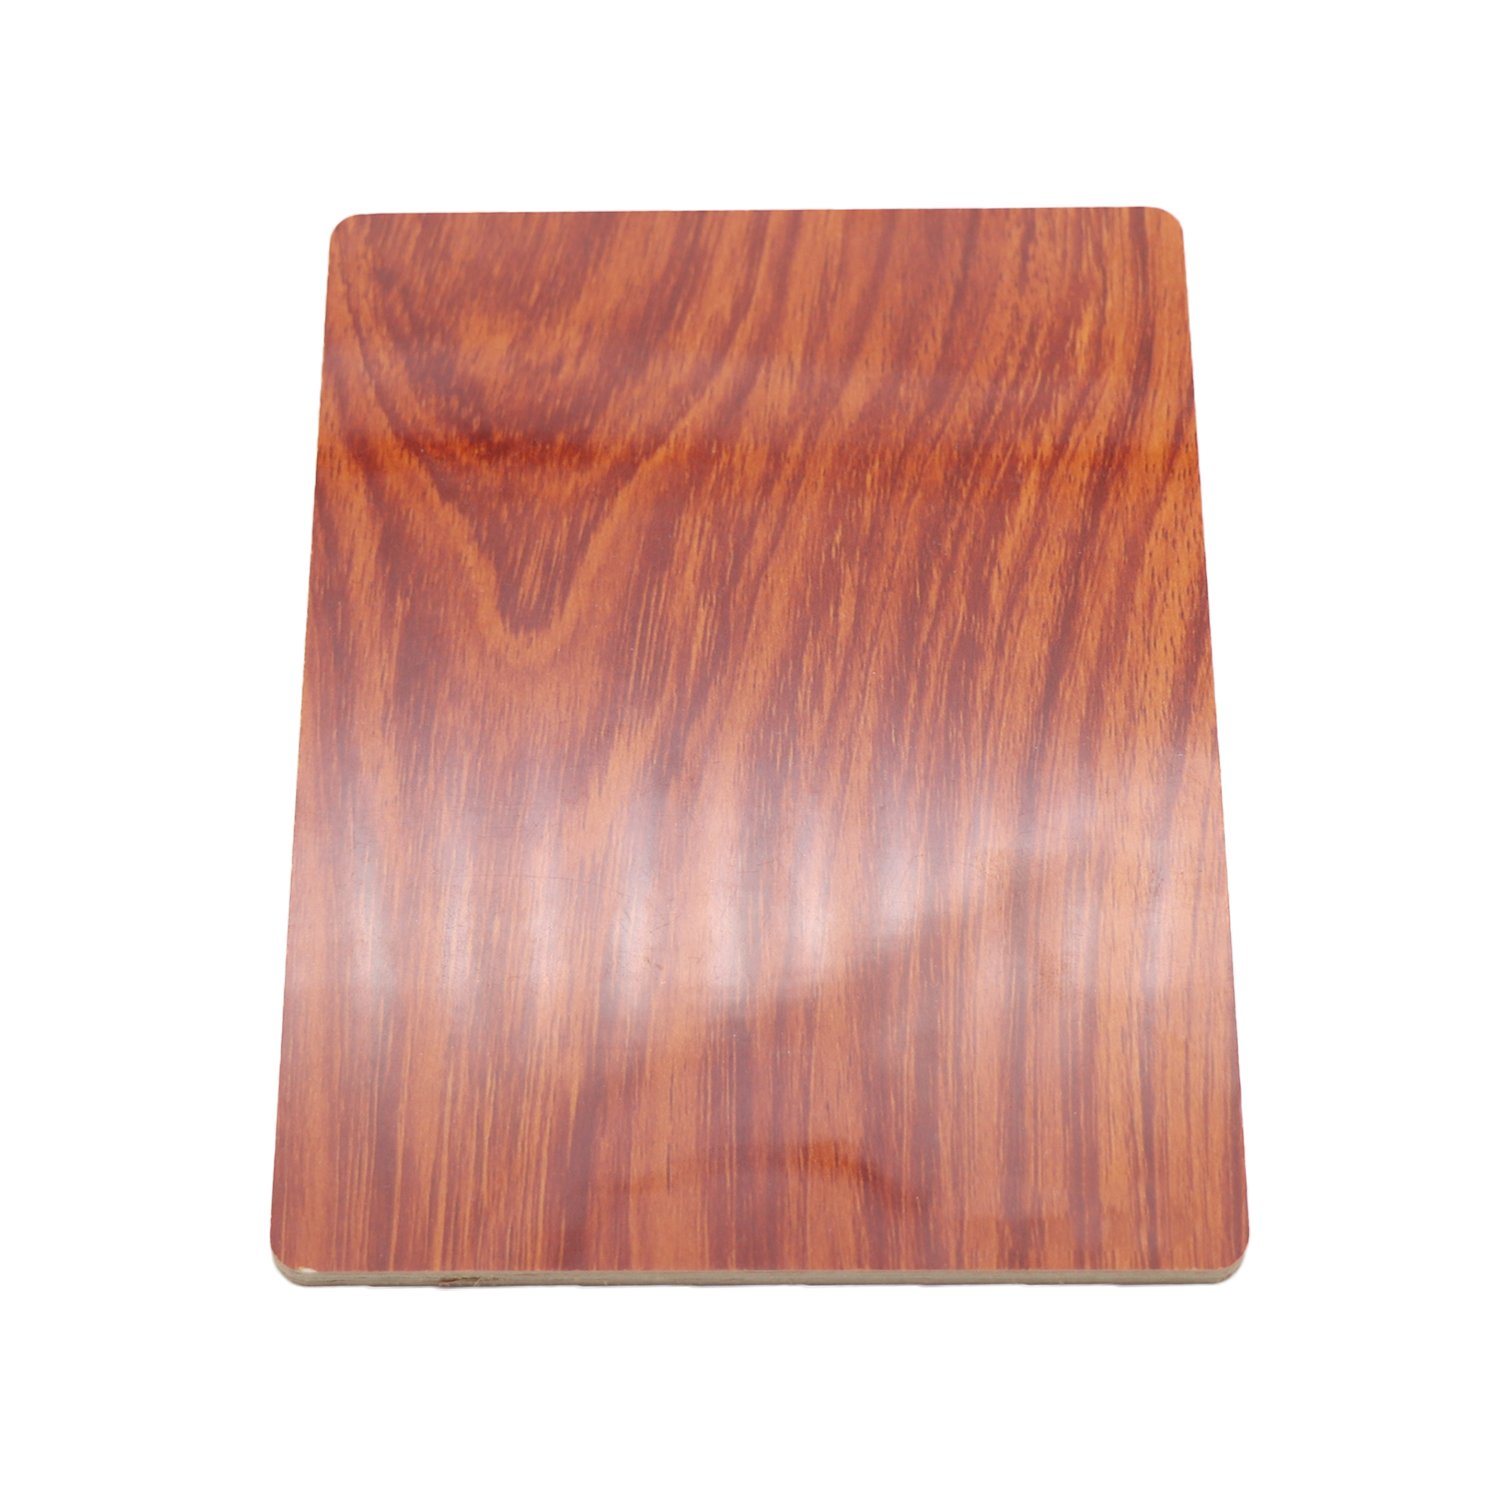 China High Grade Melamine Faced Smooth Plywood Board for Furniture